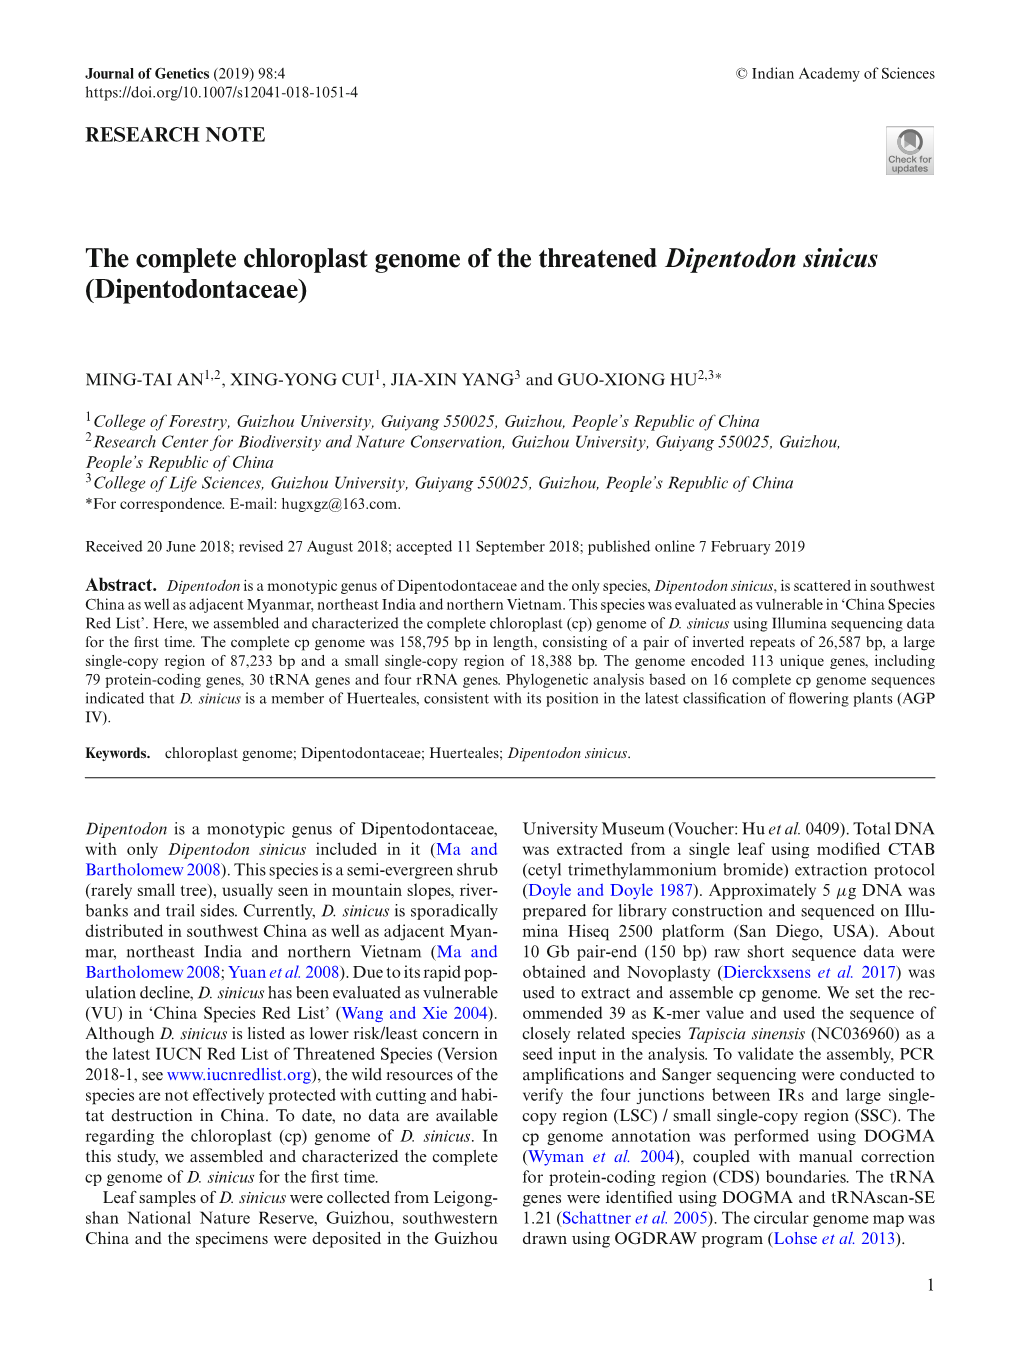 The Complete Chloroplast Genome of the Threatened Dipentodon Sinicus (Dipentodontaceae)